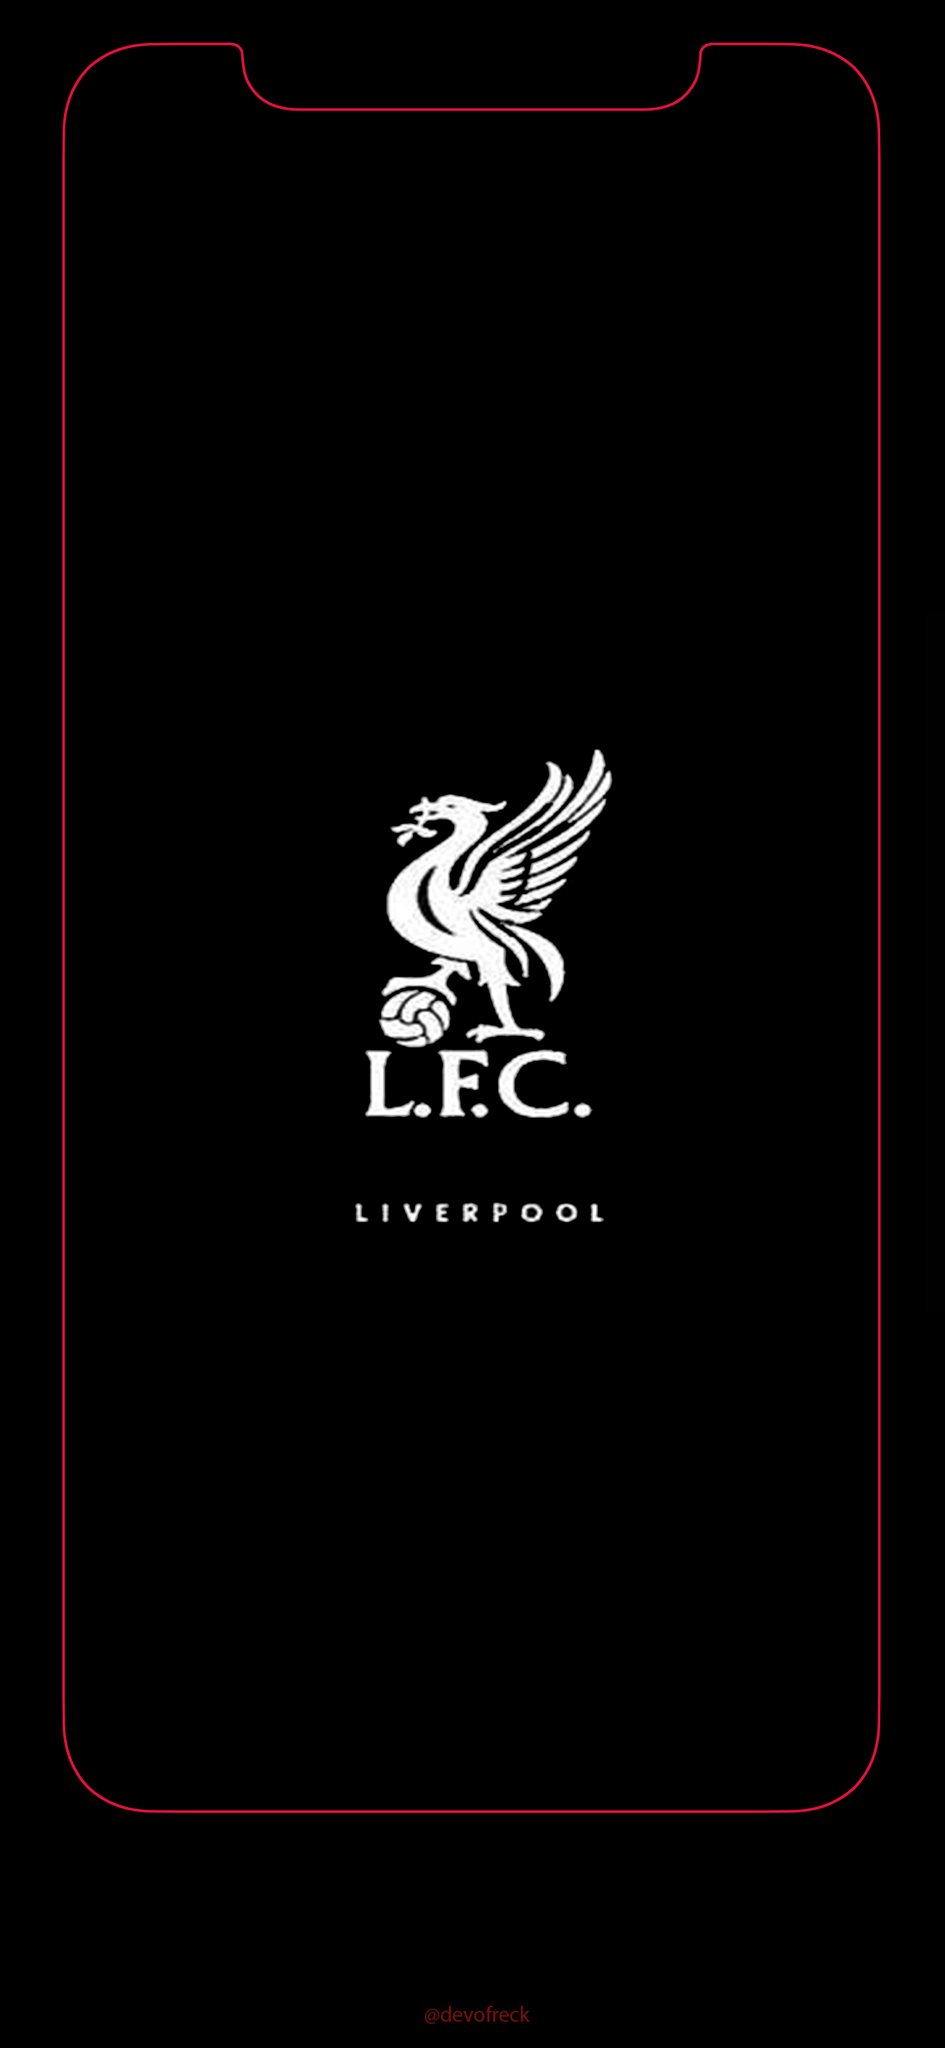 View 20+  Liverpool Wallpaper Hd Images